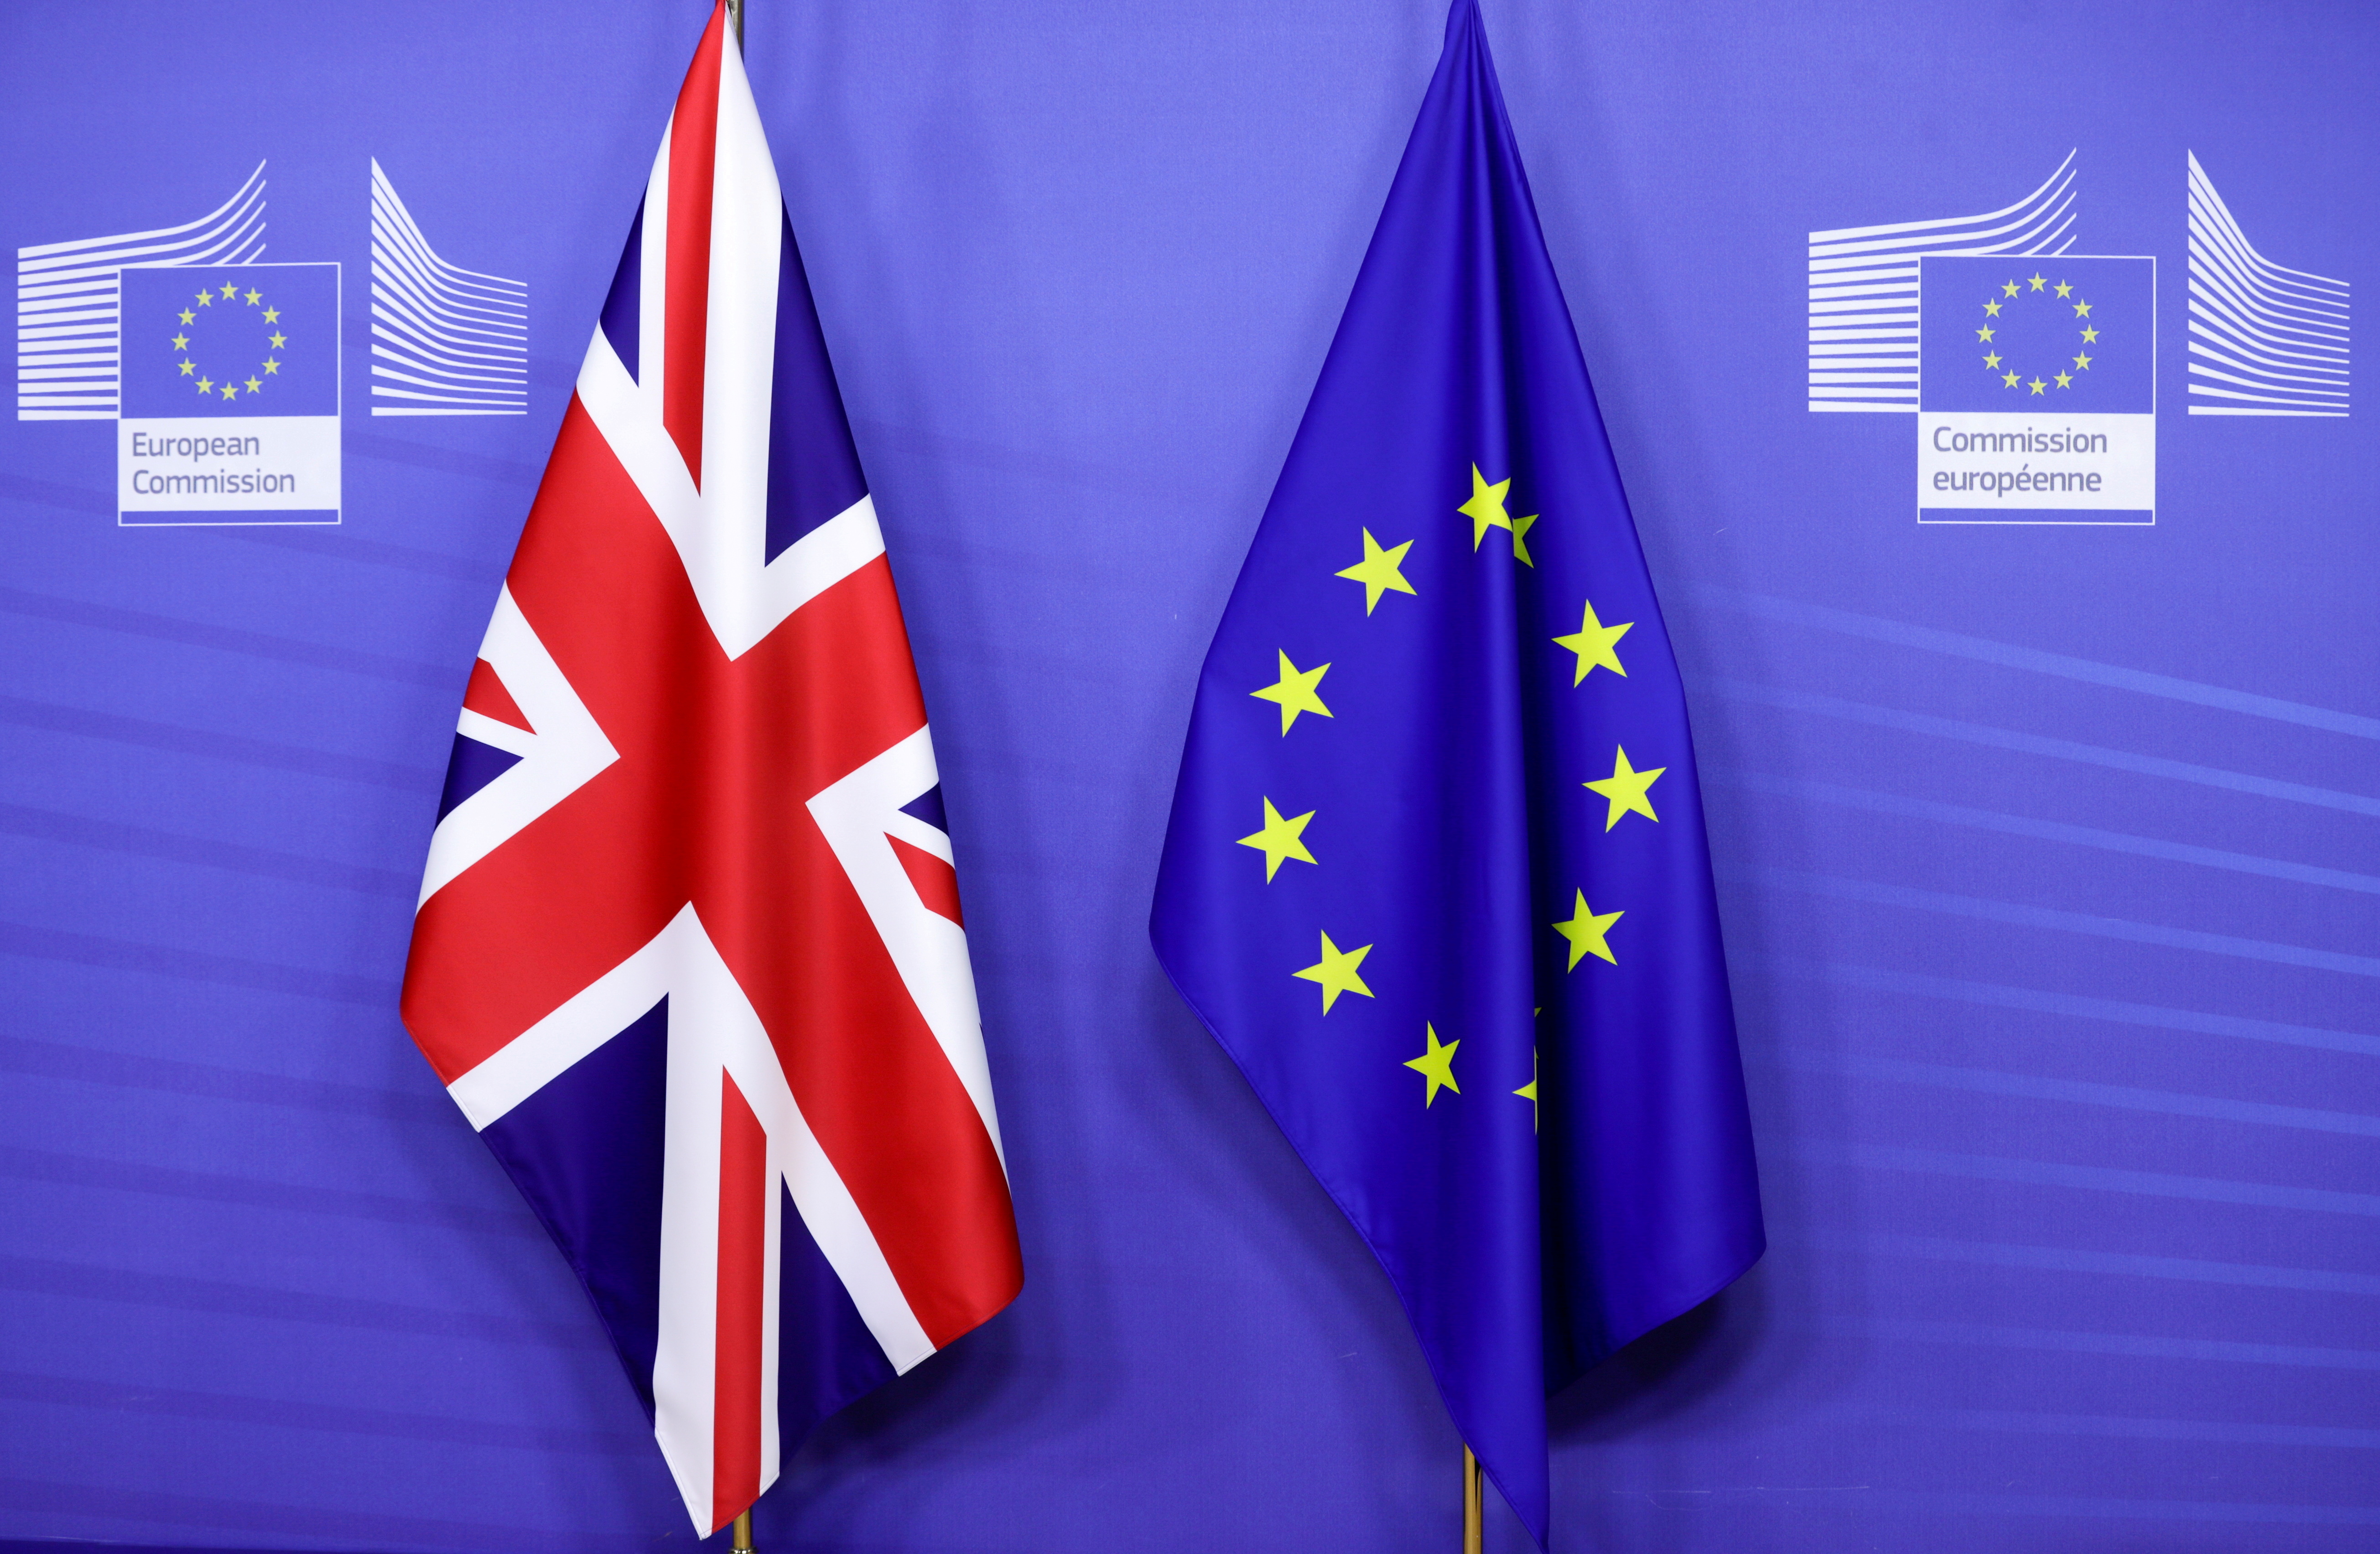 British and European Union flags are seen ahead of a meeting of European Commission President Ursula von der Leyen and British Prime Minister Boris Johnson in Brussels